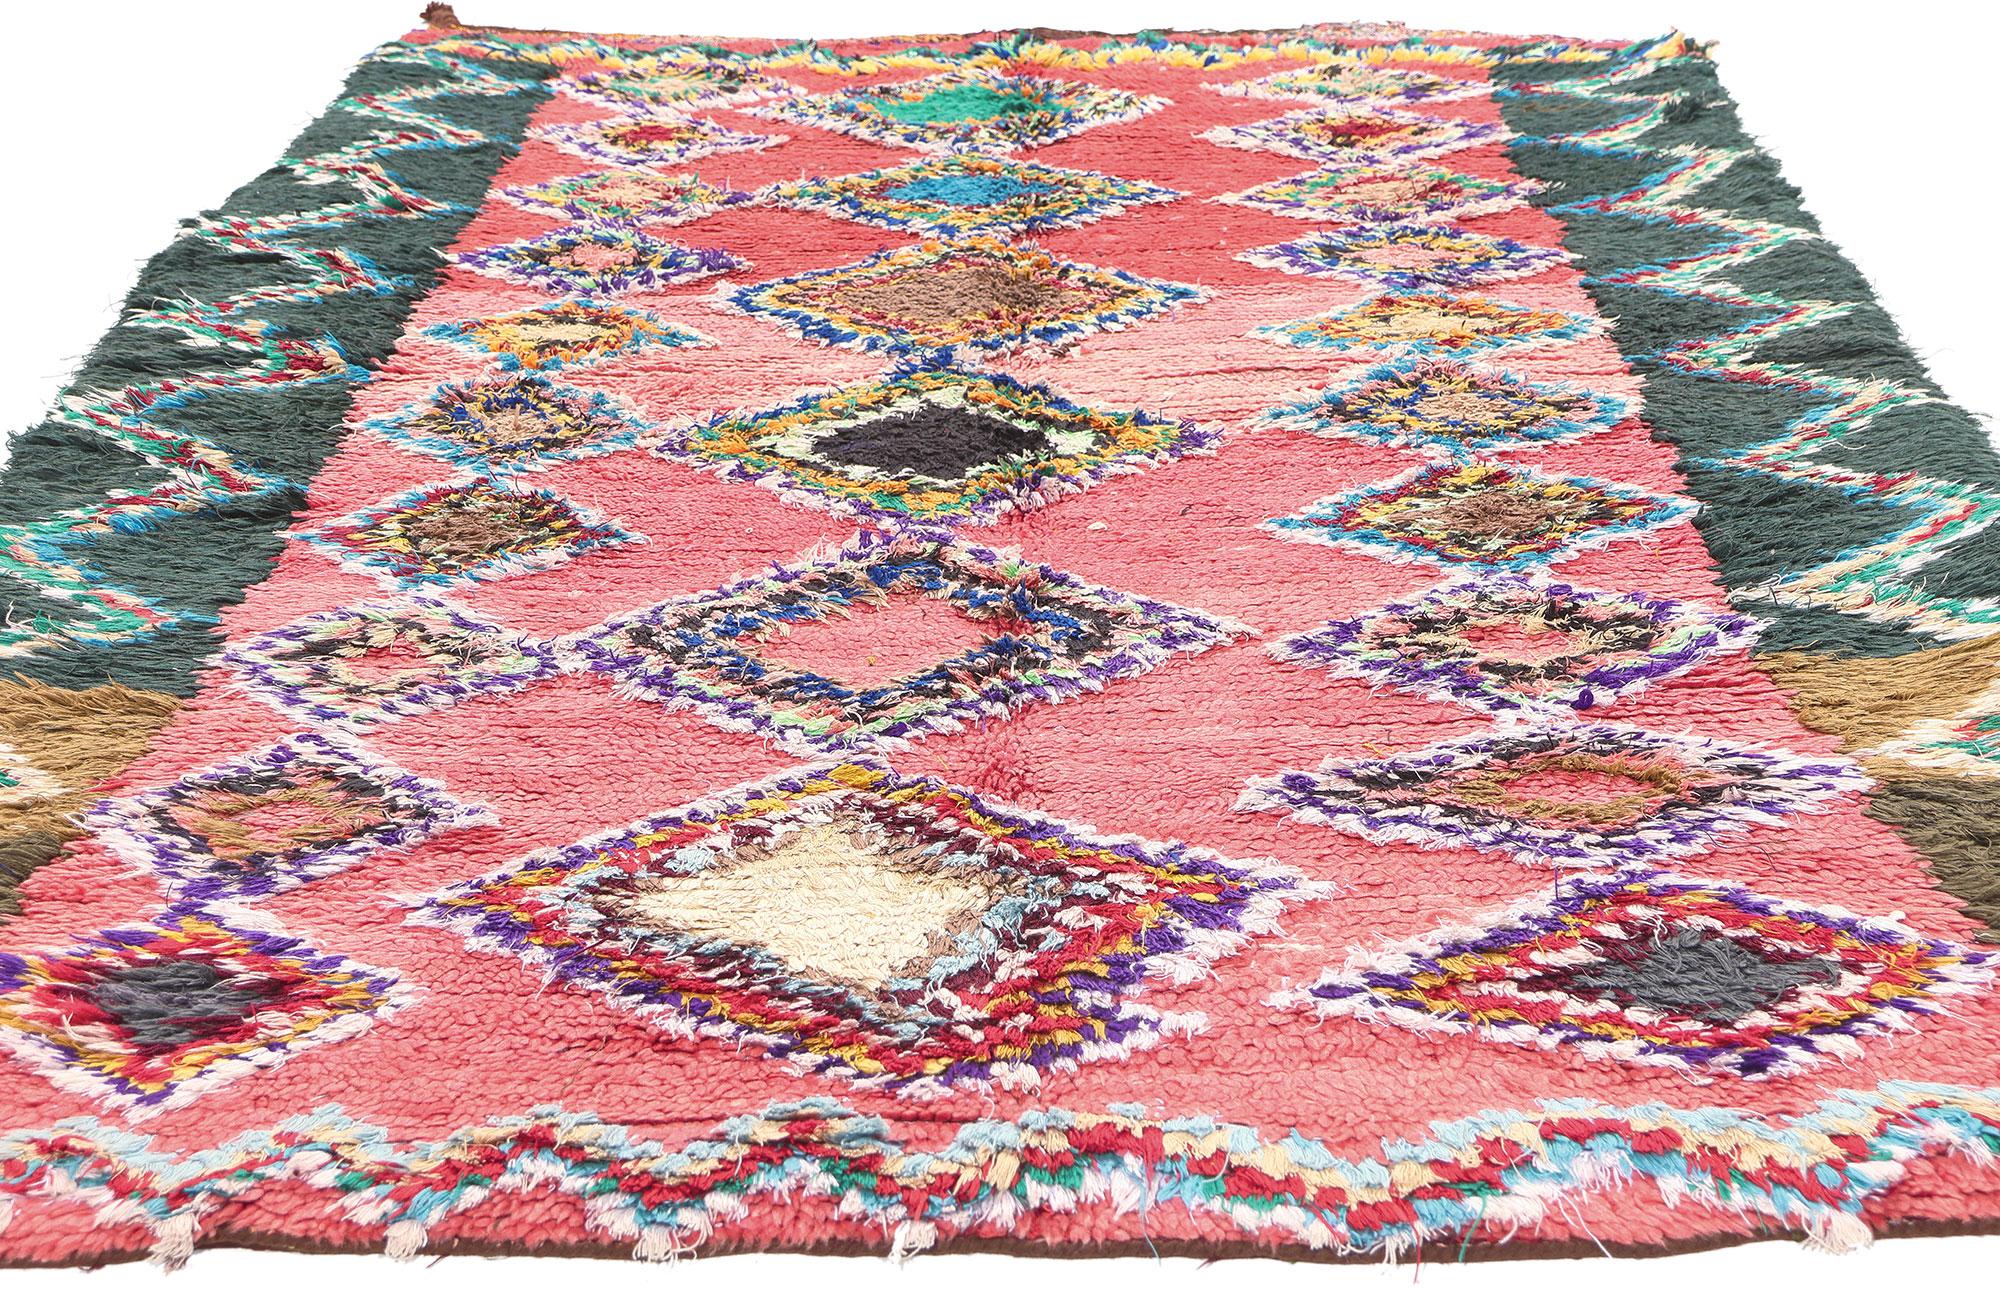 Tribal Vintage Boucherouite Moroccan Azilal Rag Rug by Berber Tribes of Morocco For Sale